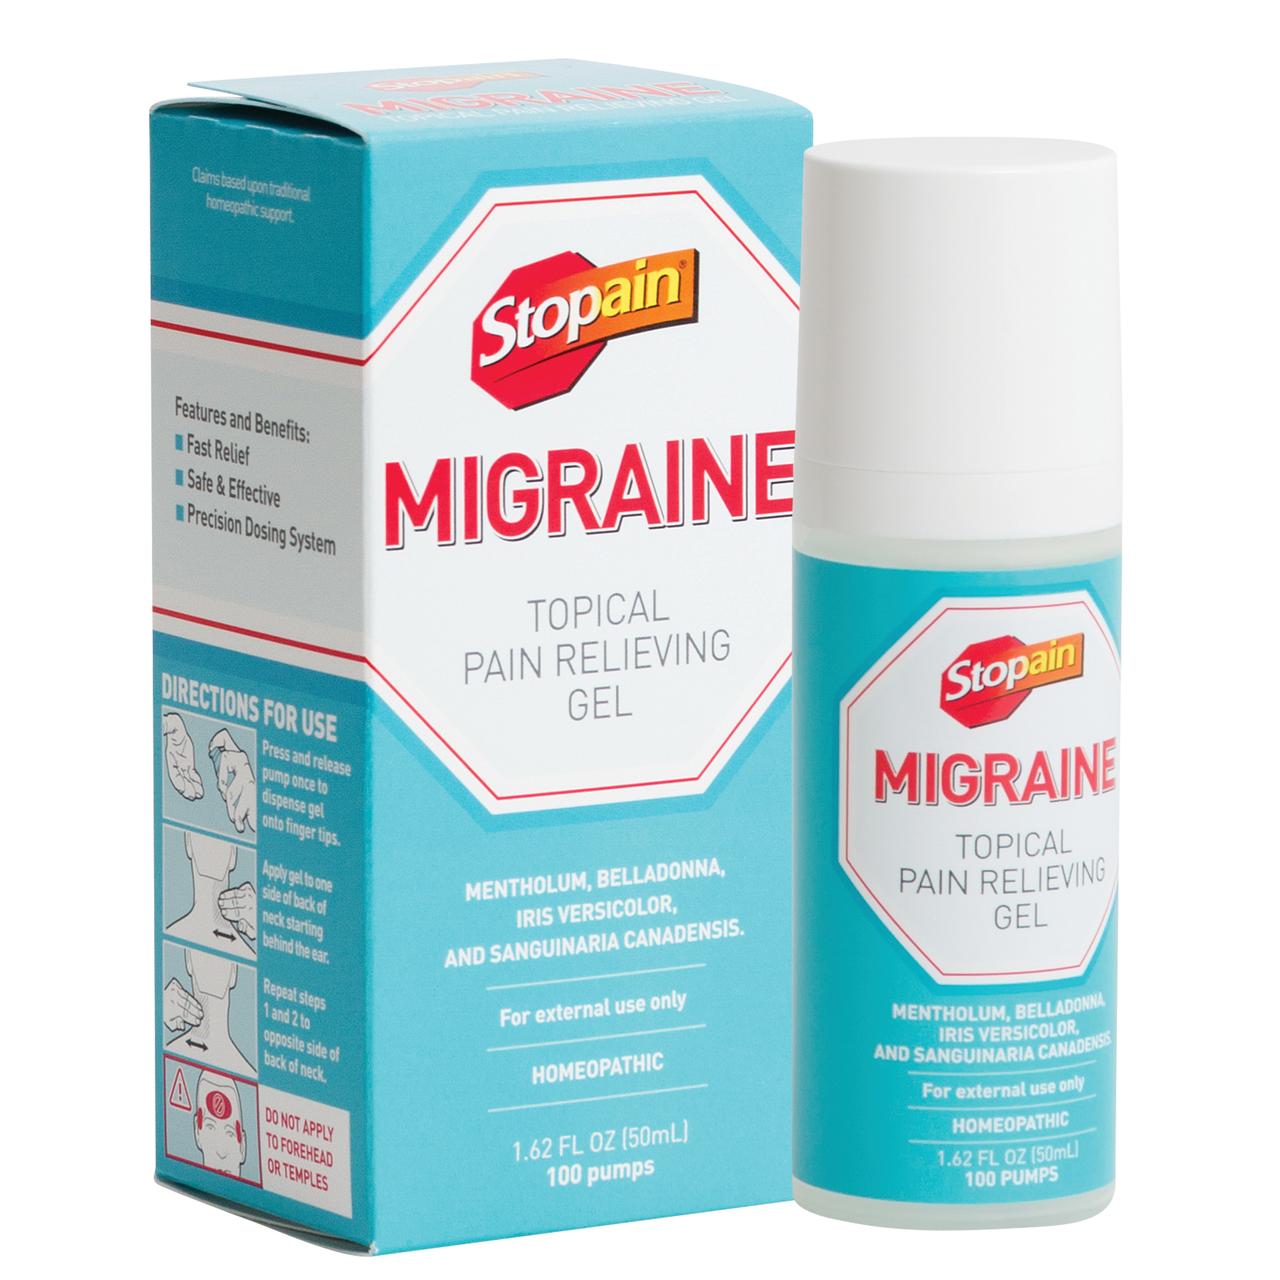 Stopain Migraine Topical Pain Relieving Gel, 1.62 fl oz - image 1 of 10